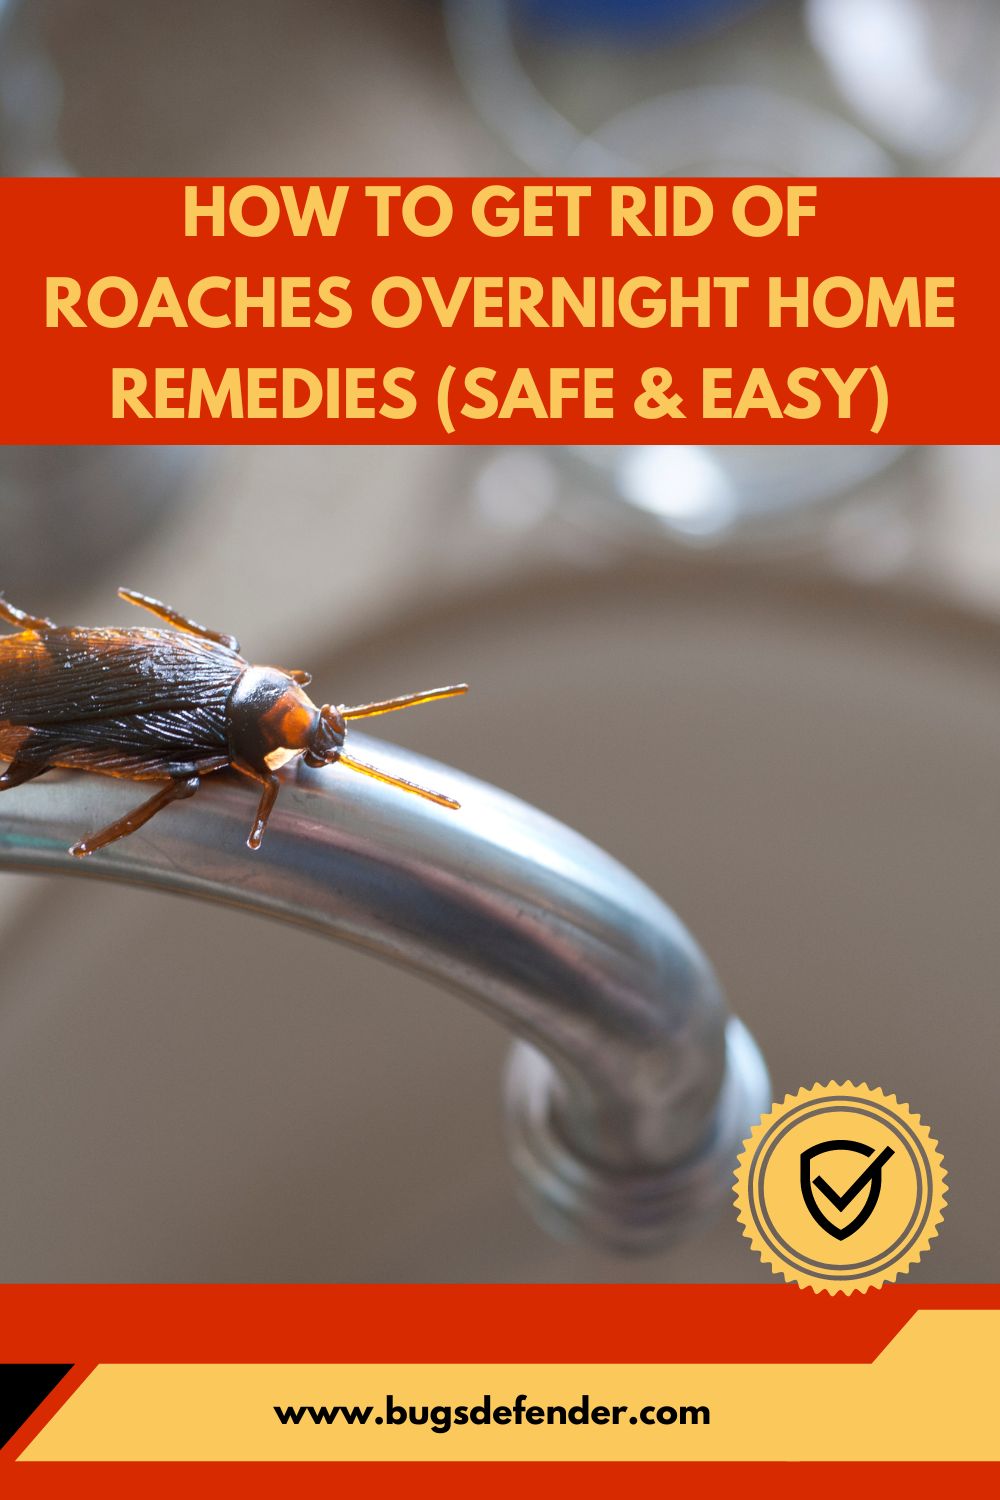 How To Get Rid Of Roaches Overnight Home Remedies (Safe & Easy) pin 1